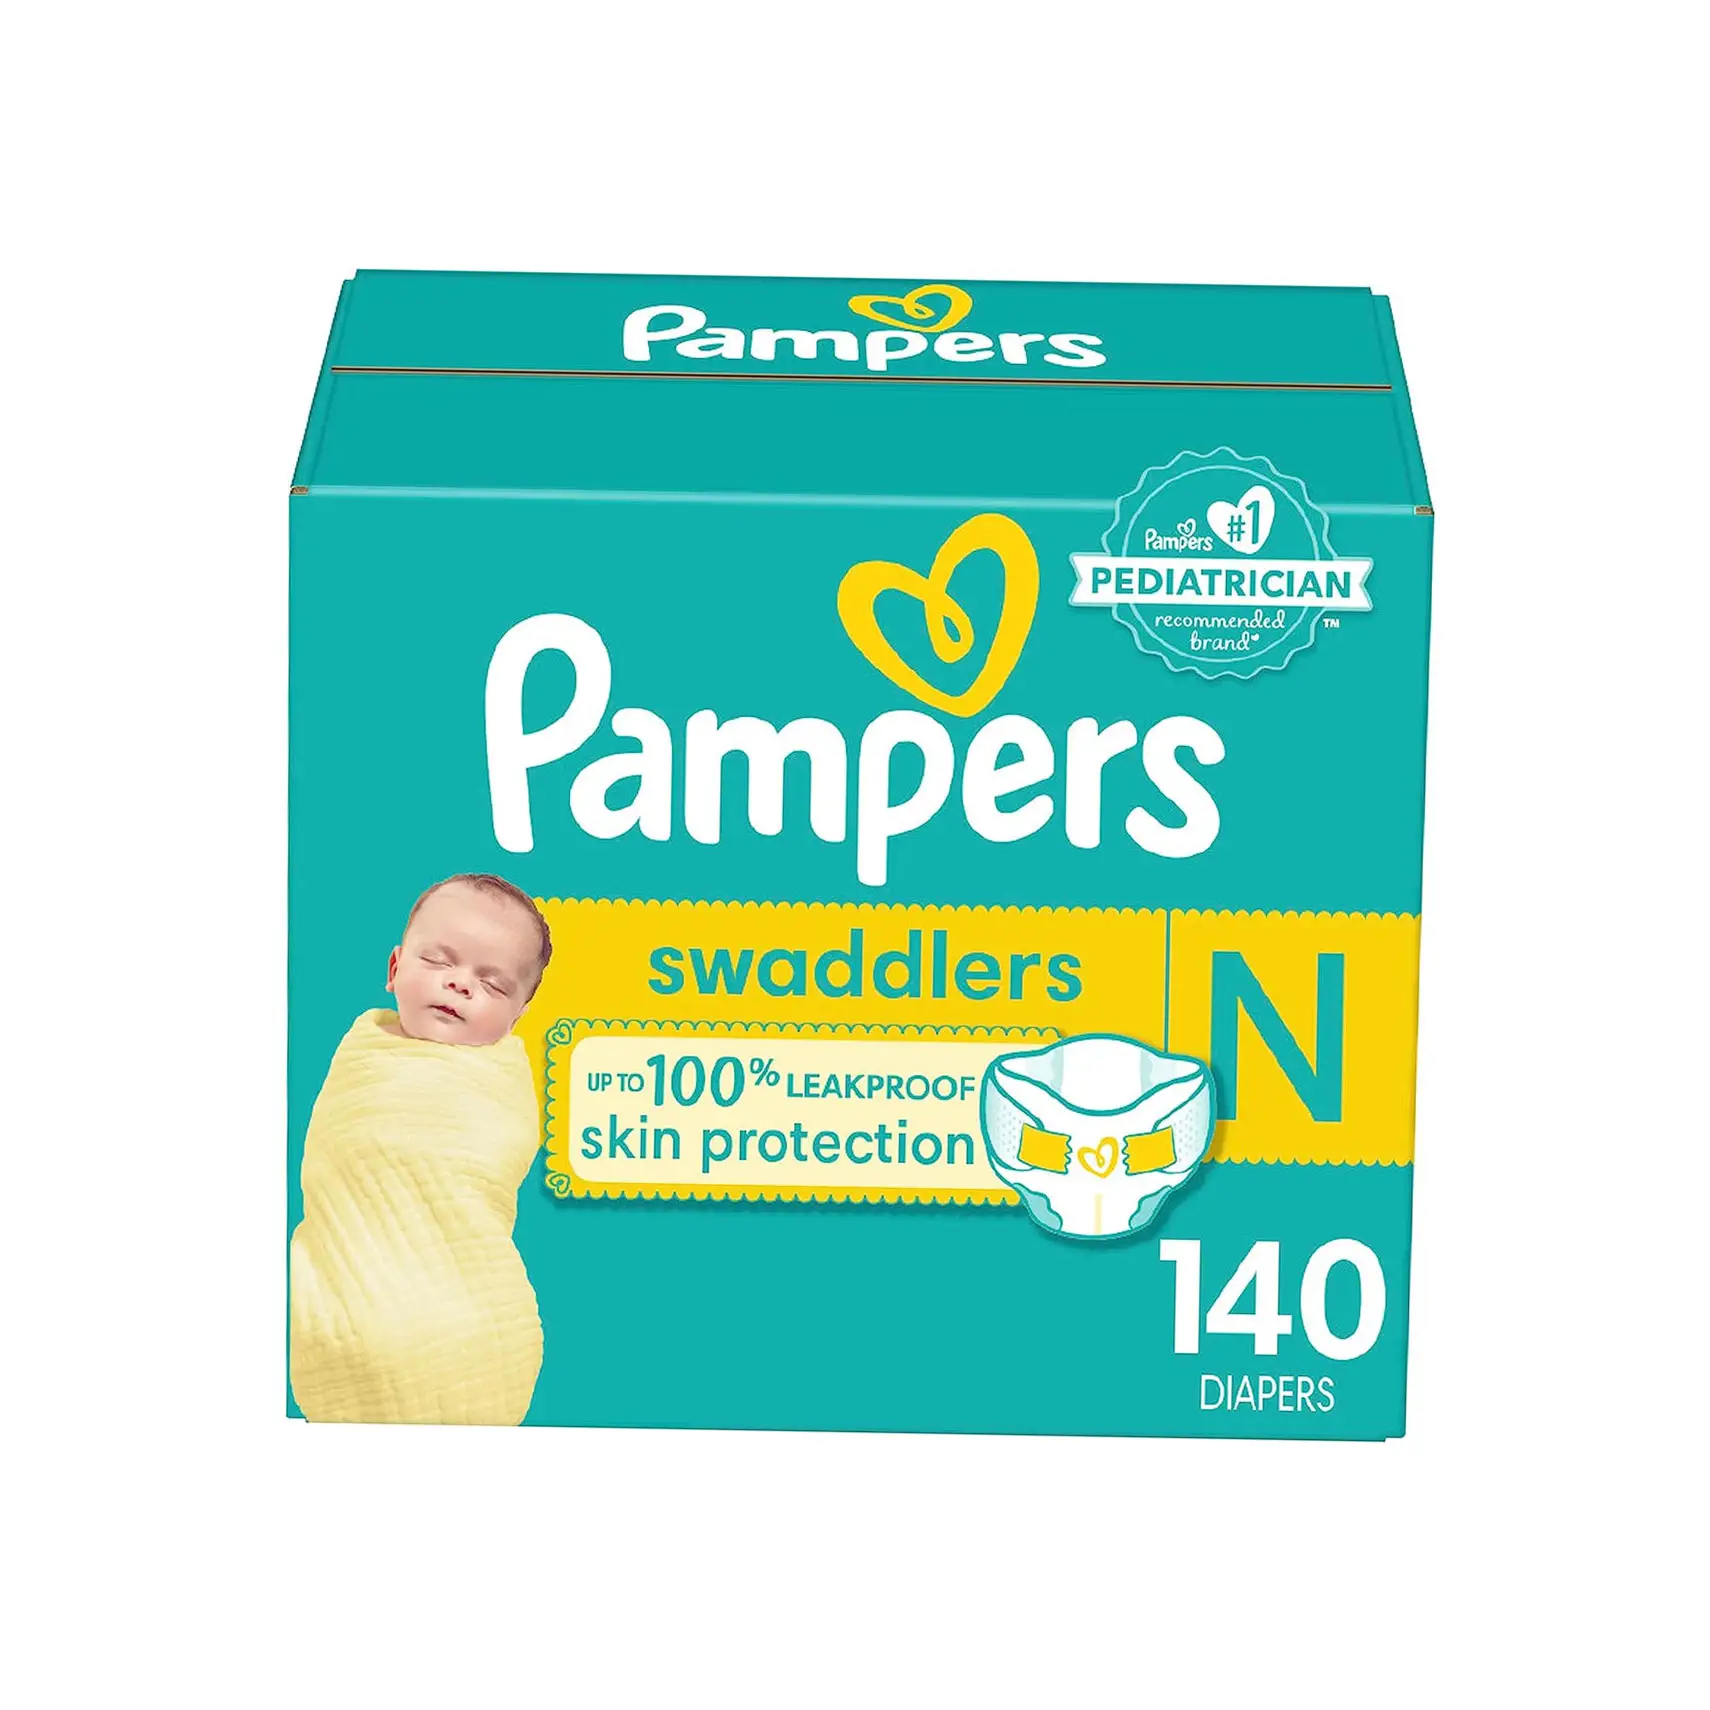 Pampers Swaddlers Newborn Diapers - Size 0, 140 Count - Ultra Soft Disposable Baby Diapers Wholesalers